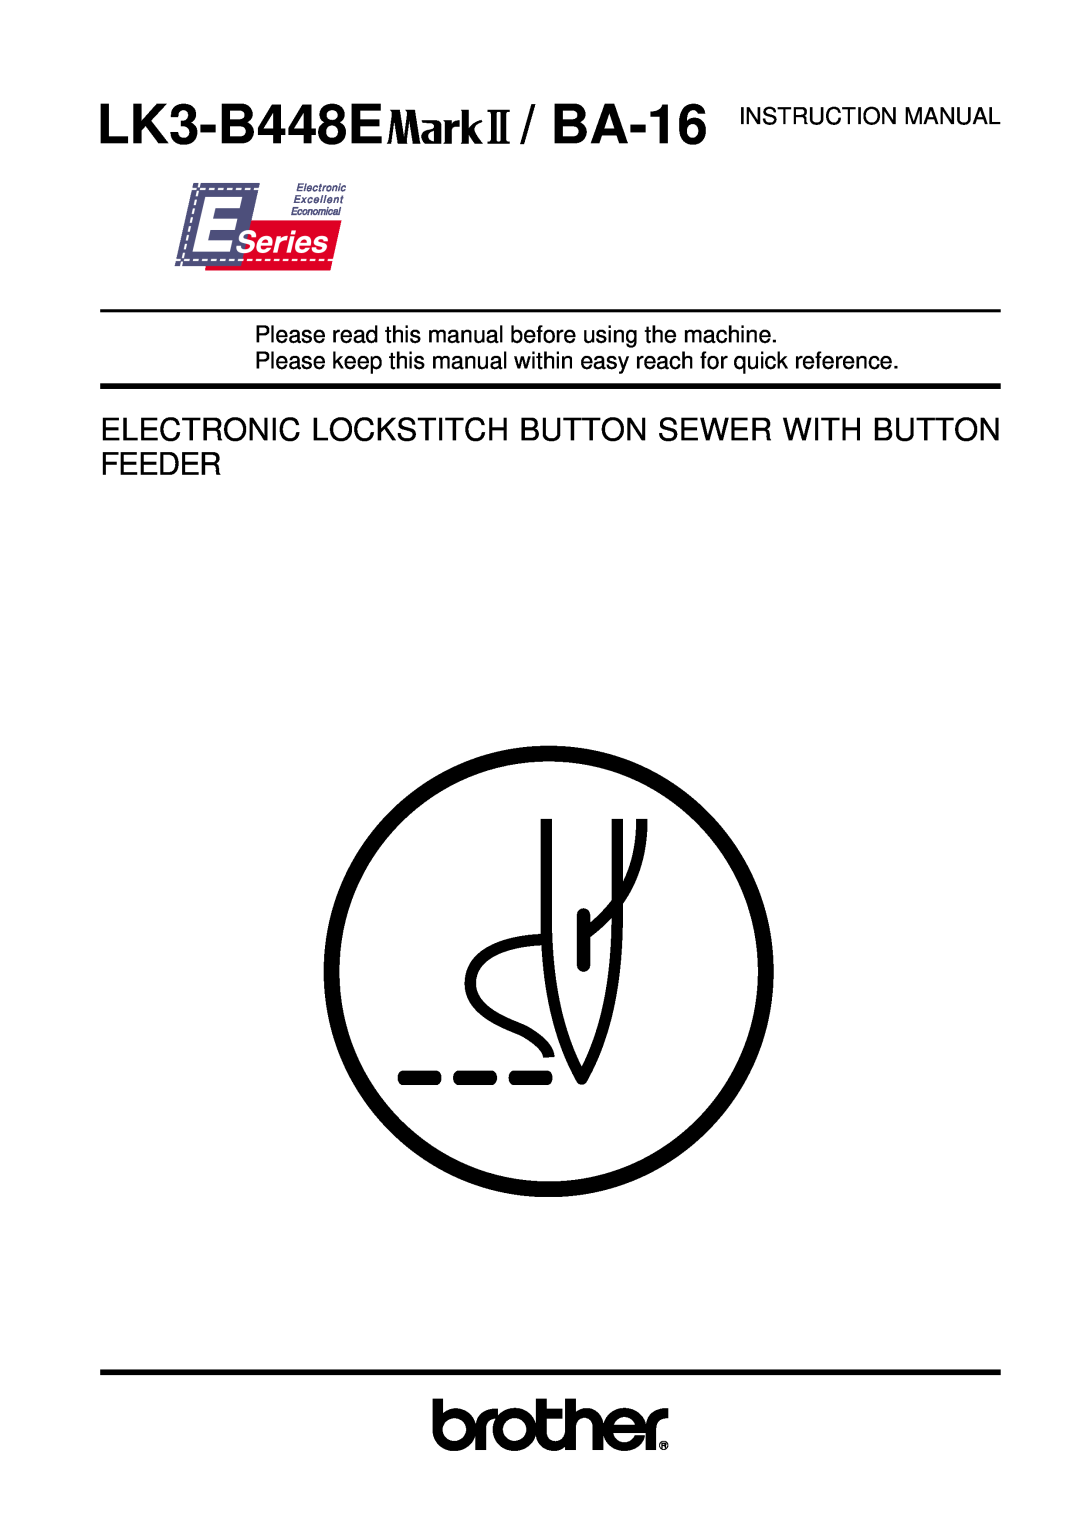 Brother LK3-B448E instruction manual BA-16 INSTRUCTION MANUAL, Please read this manual before using the machine 